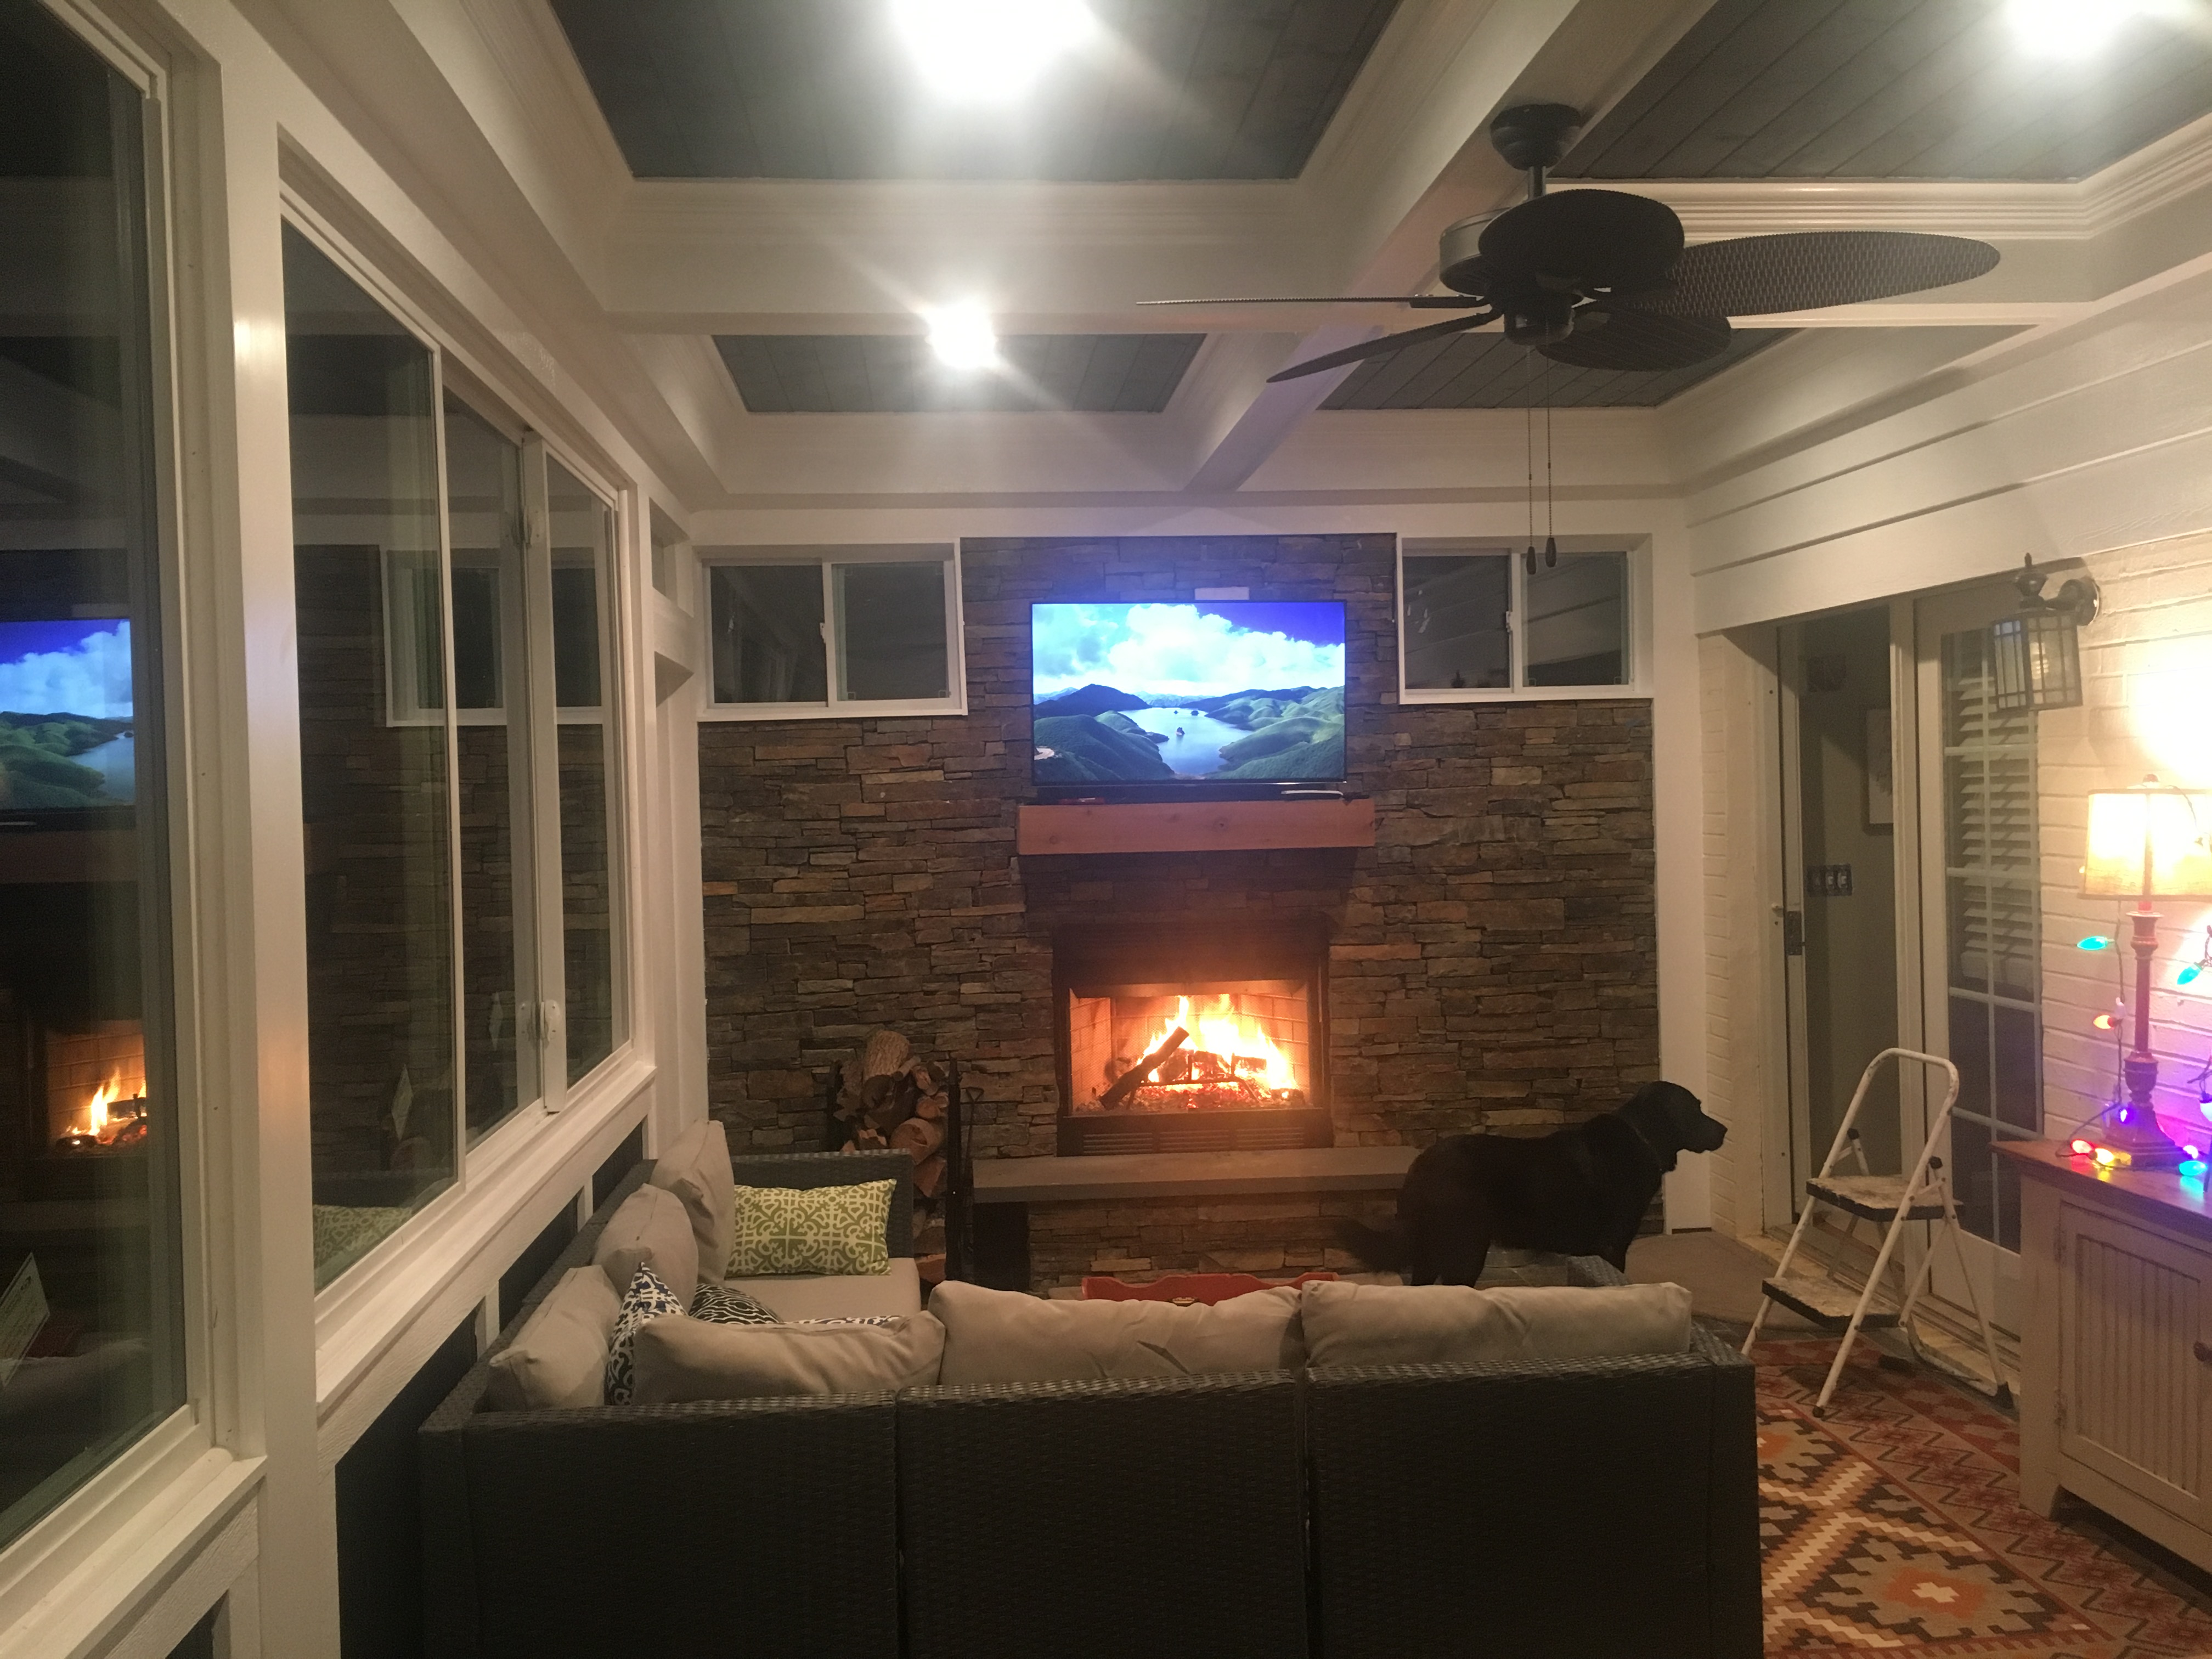 Fireplace and TV in Sunroom